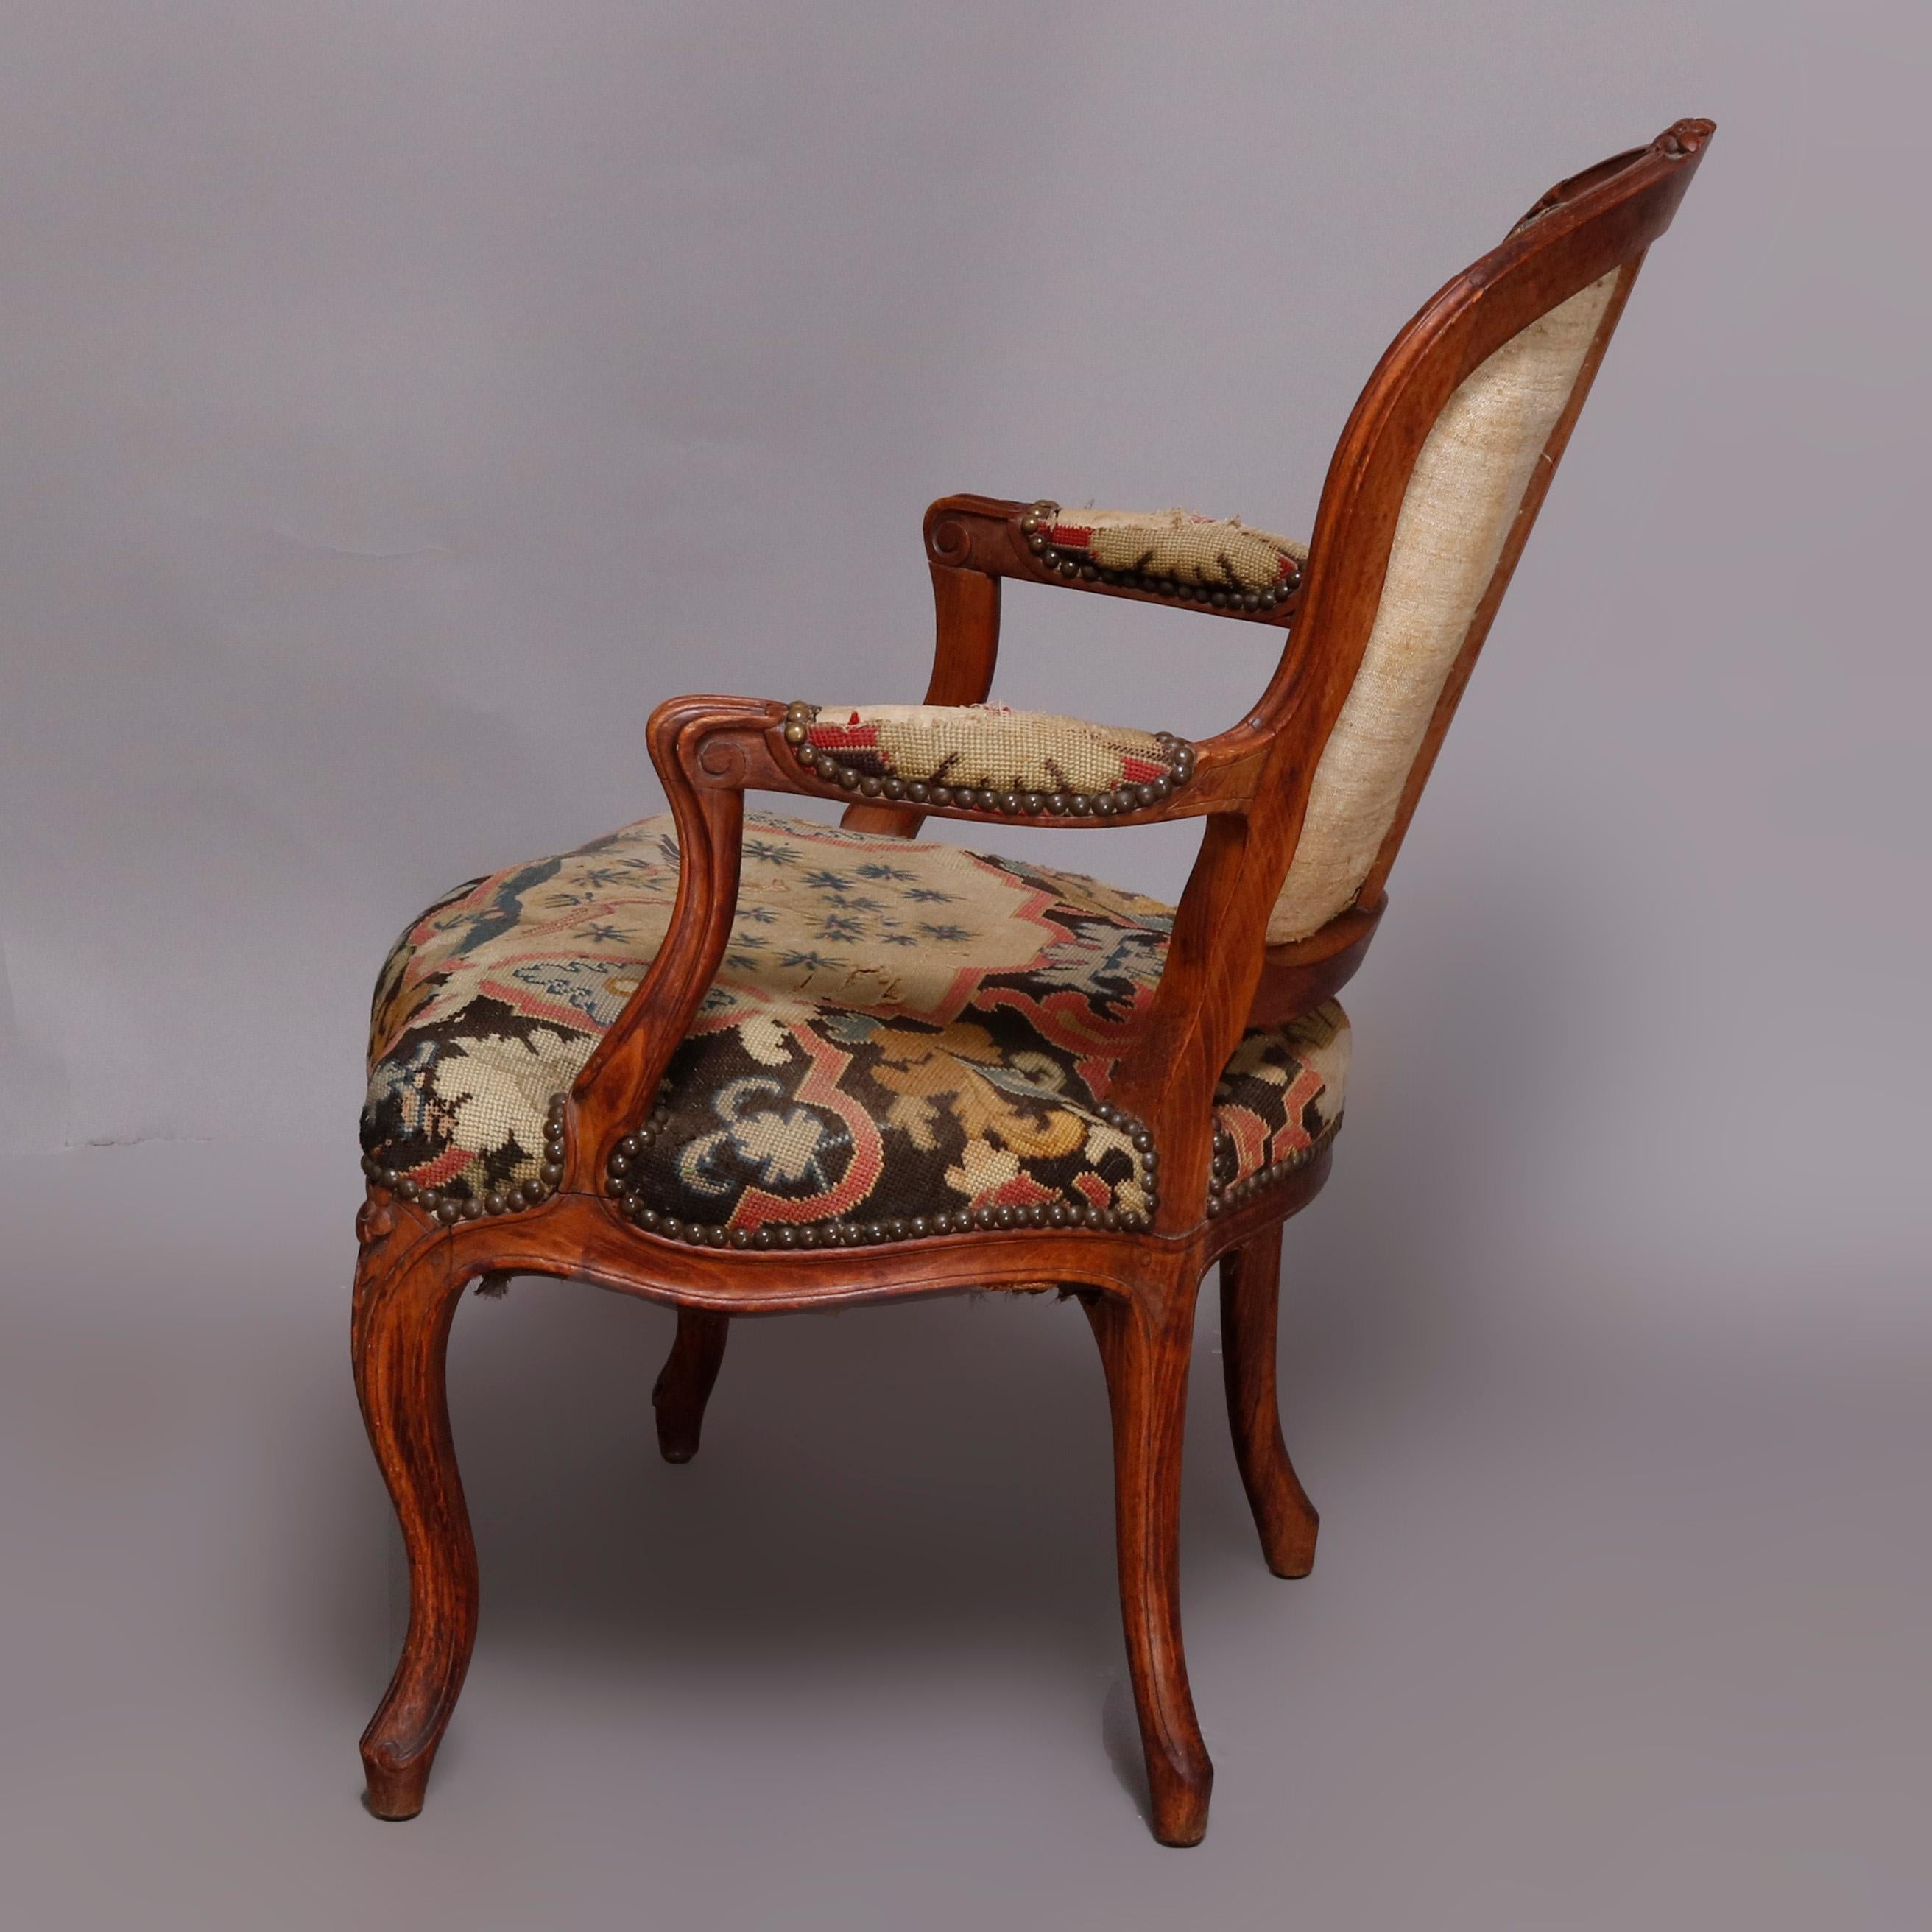 Upholstery French Louis XV Carved Fruitwood & Pictorial Needlepoint Fauteuils, circa 1790